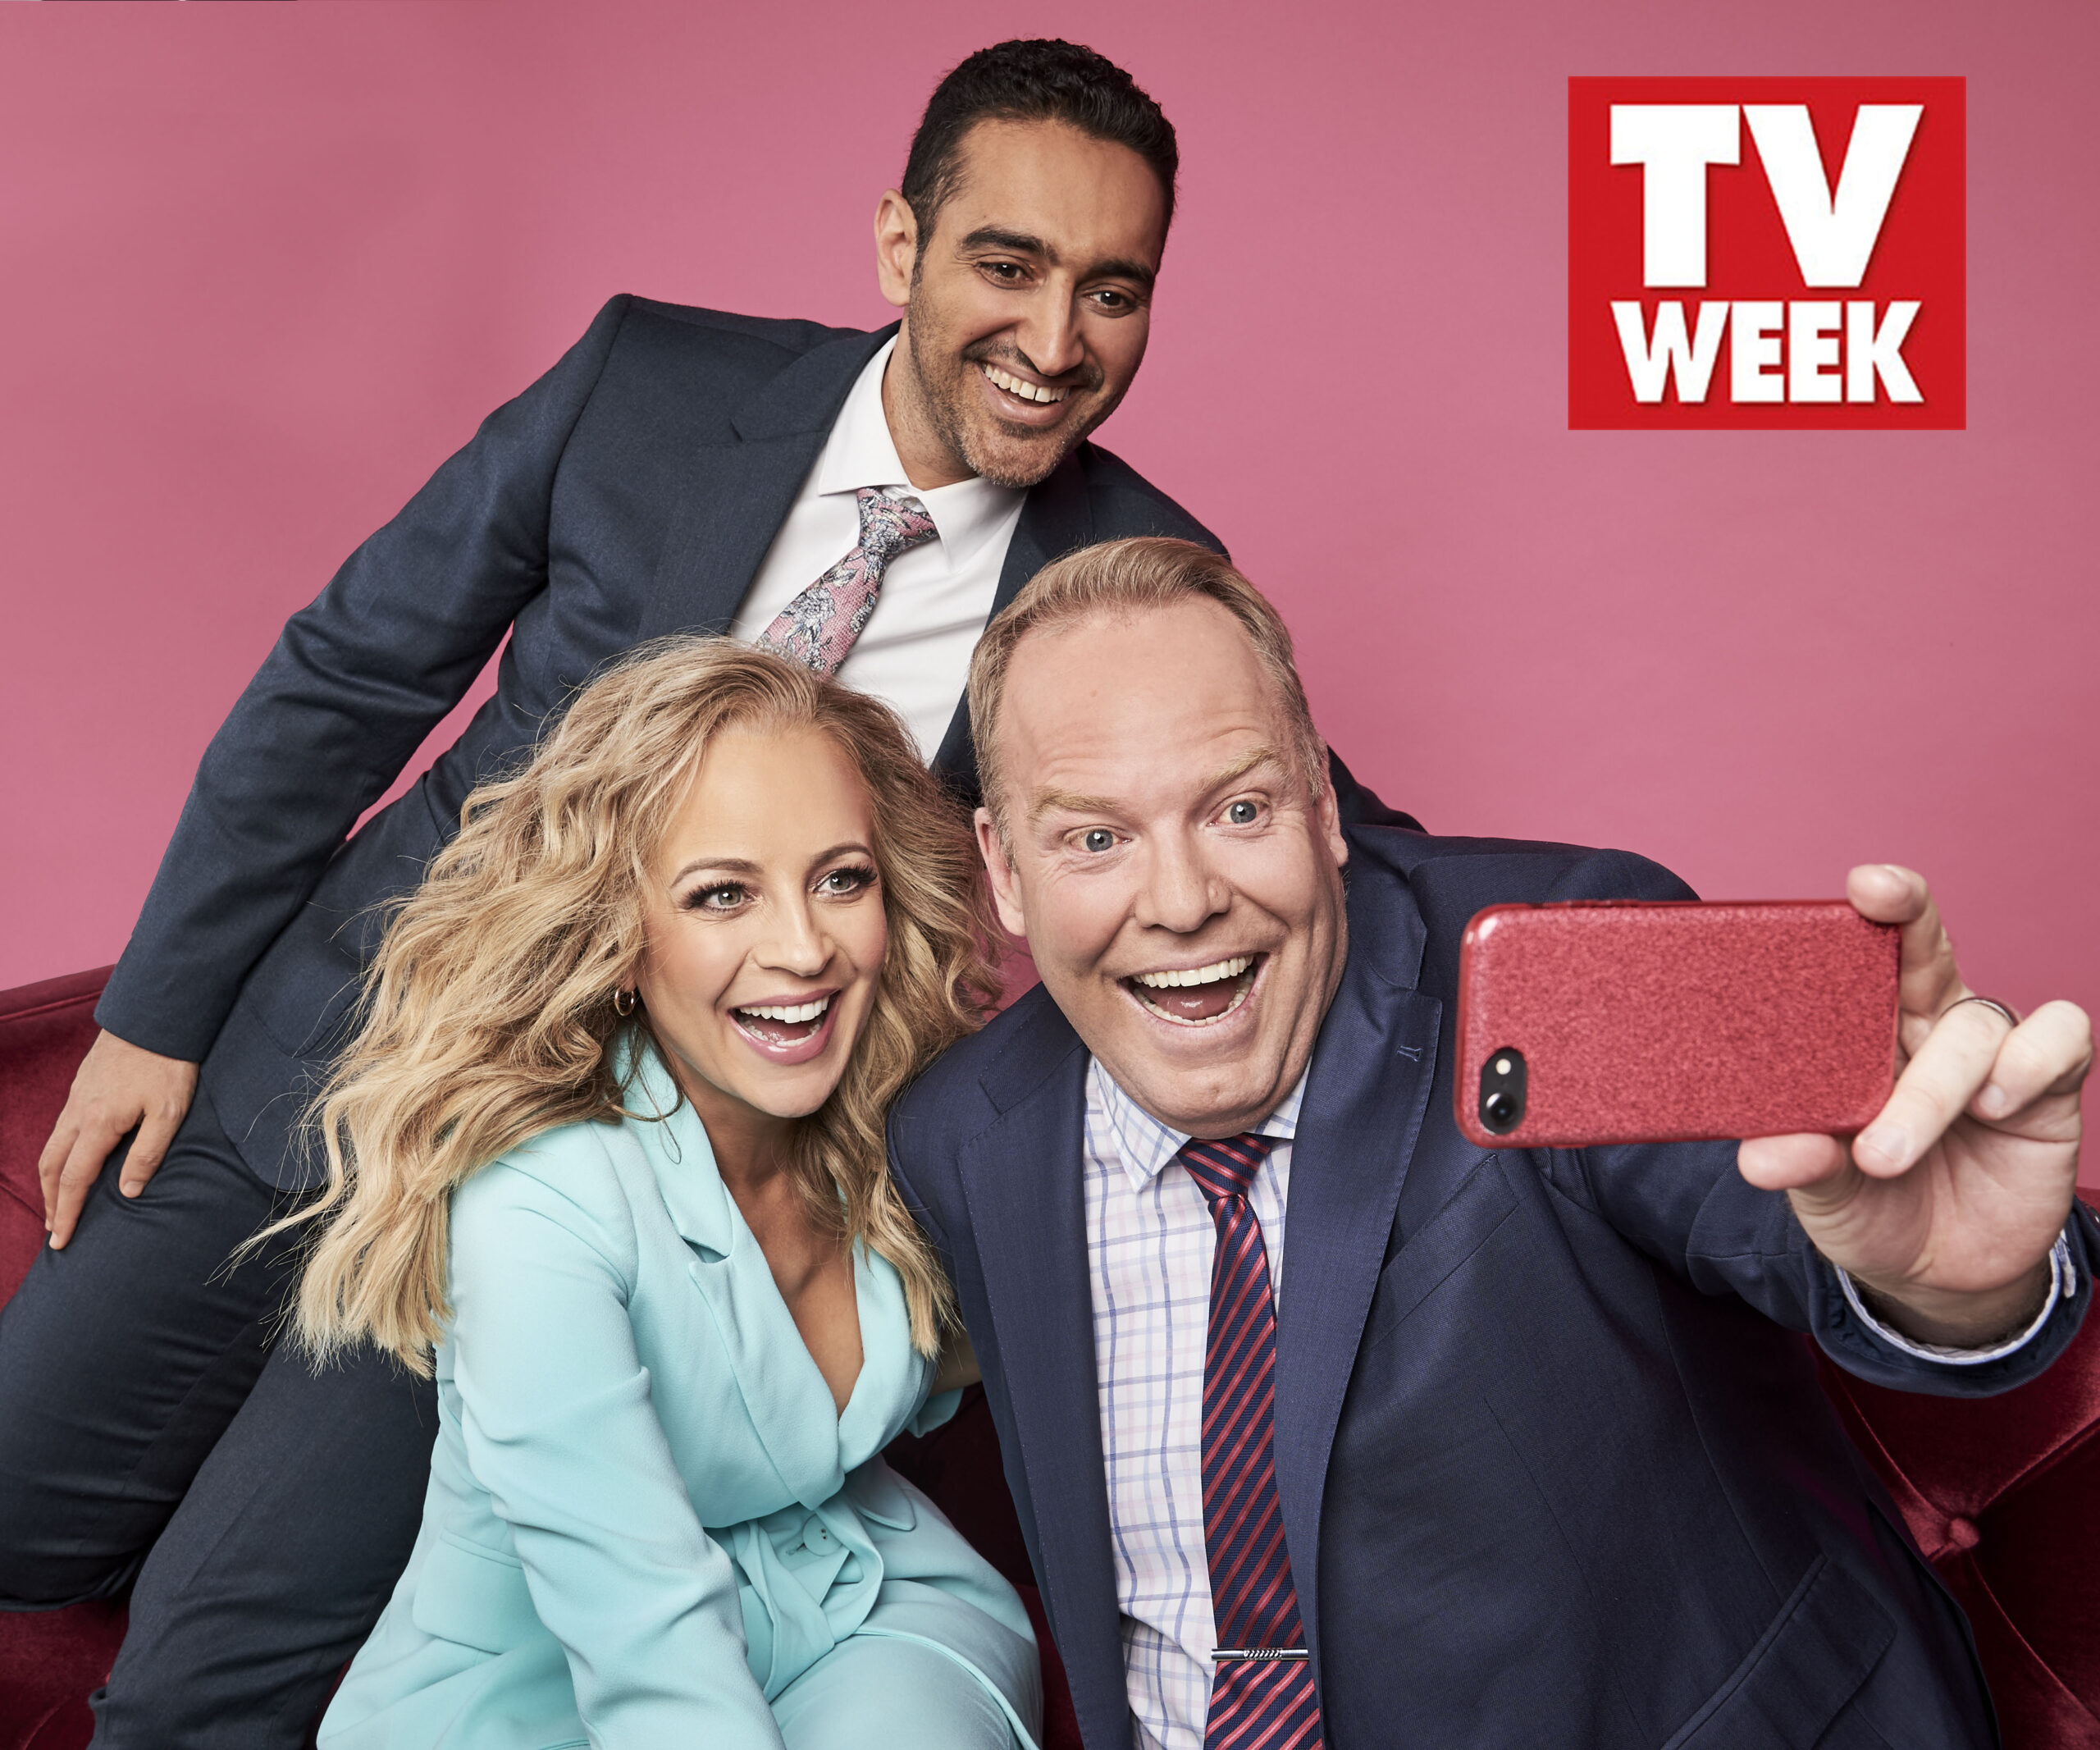 Carrie Bickmore, Waleed Aly and Peter Helliar on The Project’s biggest successes – and failures